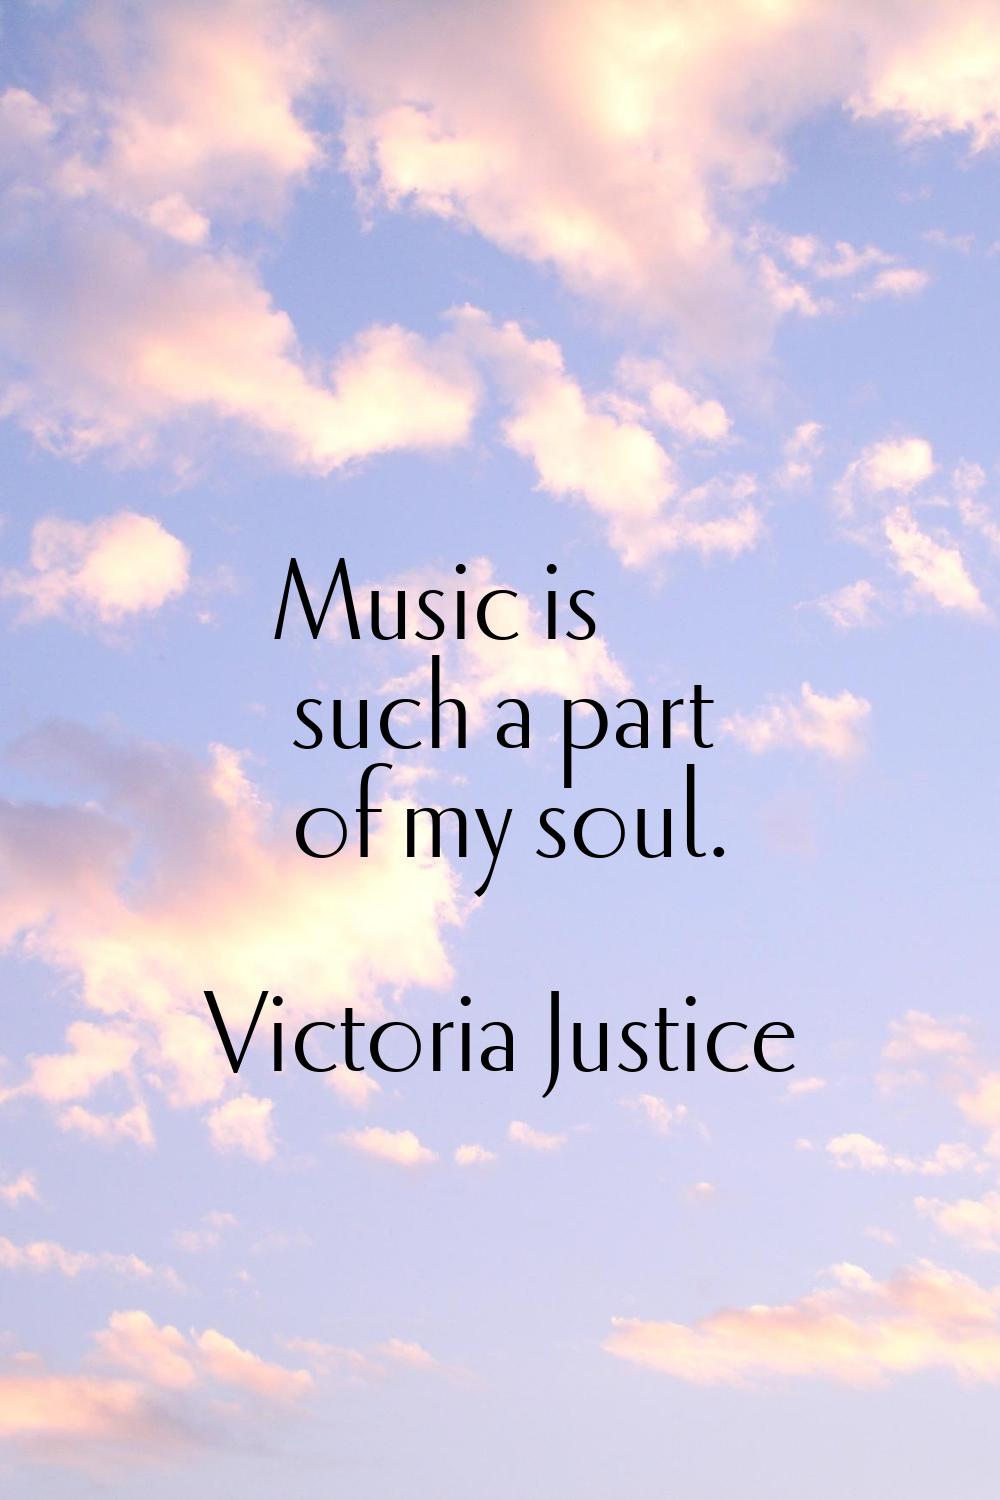 Music is such a part of my soul.